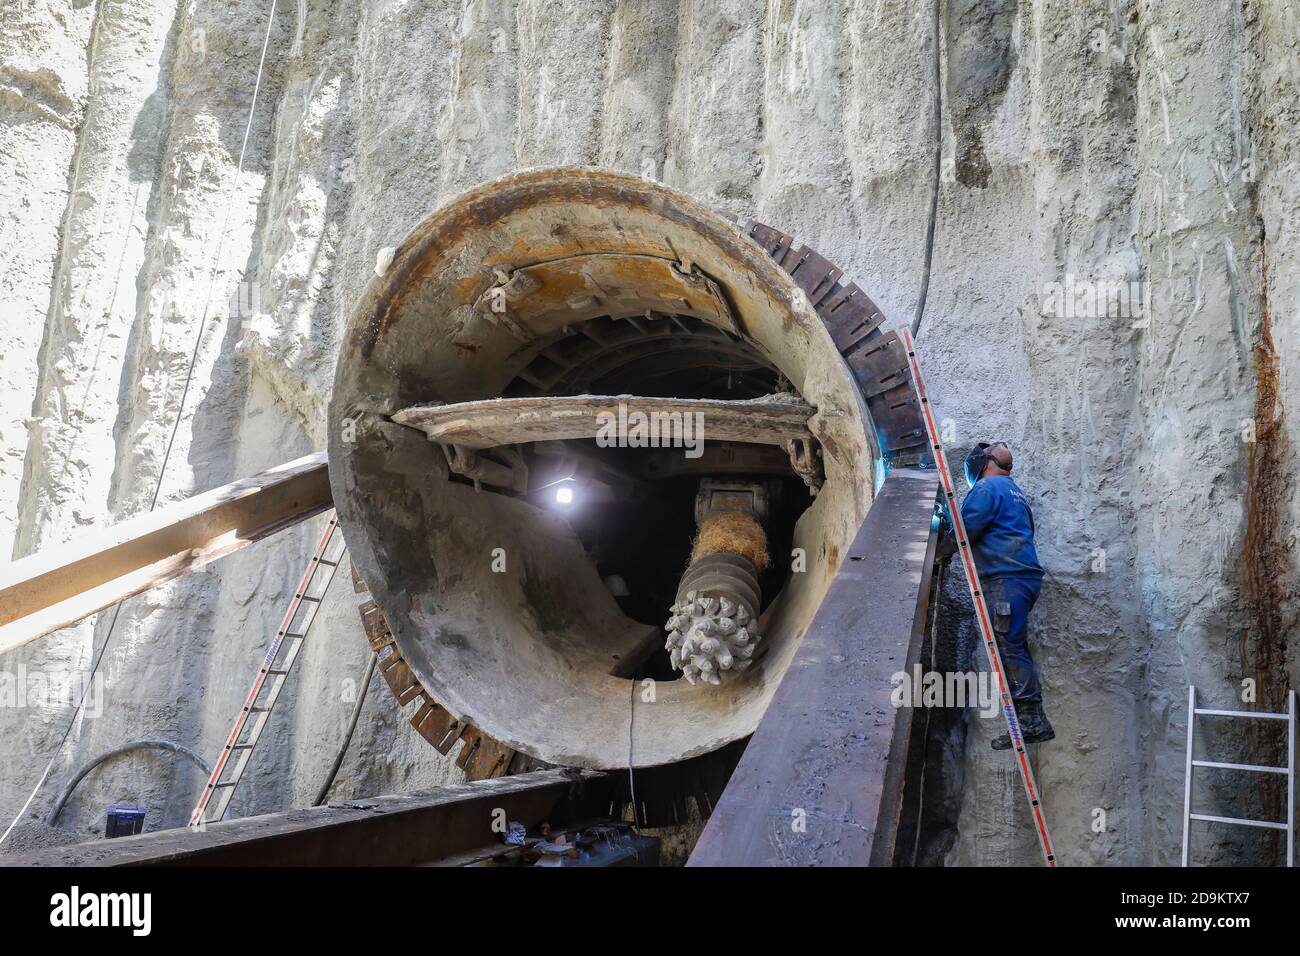 New construction of the Berne sewer, entry of the tunnel boring machine into the shaft, the Berne belongs to the Emscher river system, was previously an open, above-ground wastewater sewer, Emscher conversion, Essen, Ruhr area, North Rhine-Westphalia, Germany Stock Photo